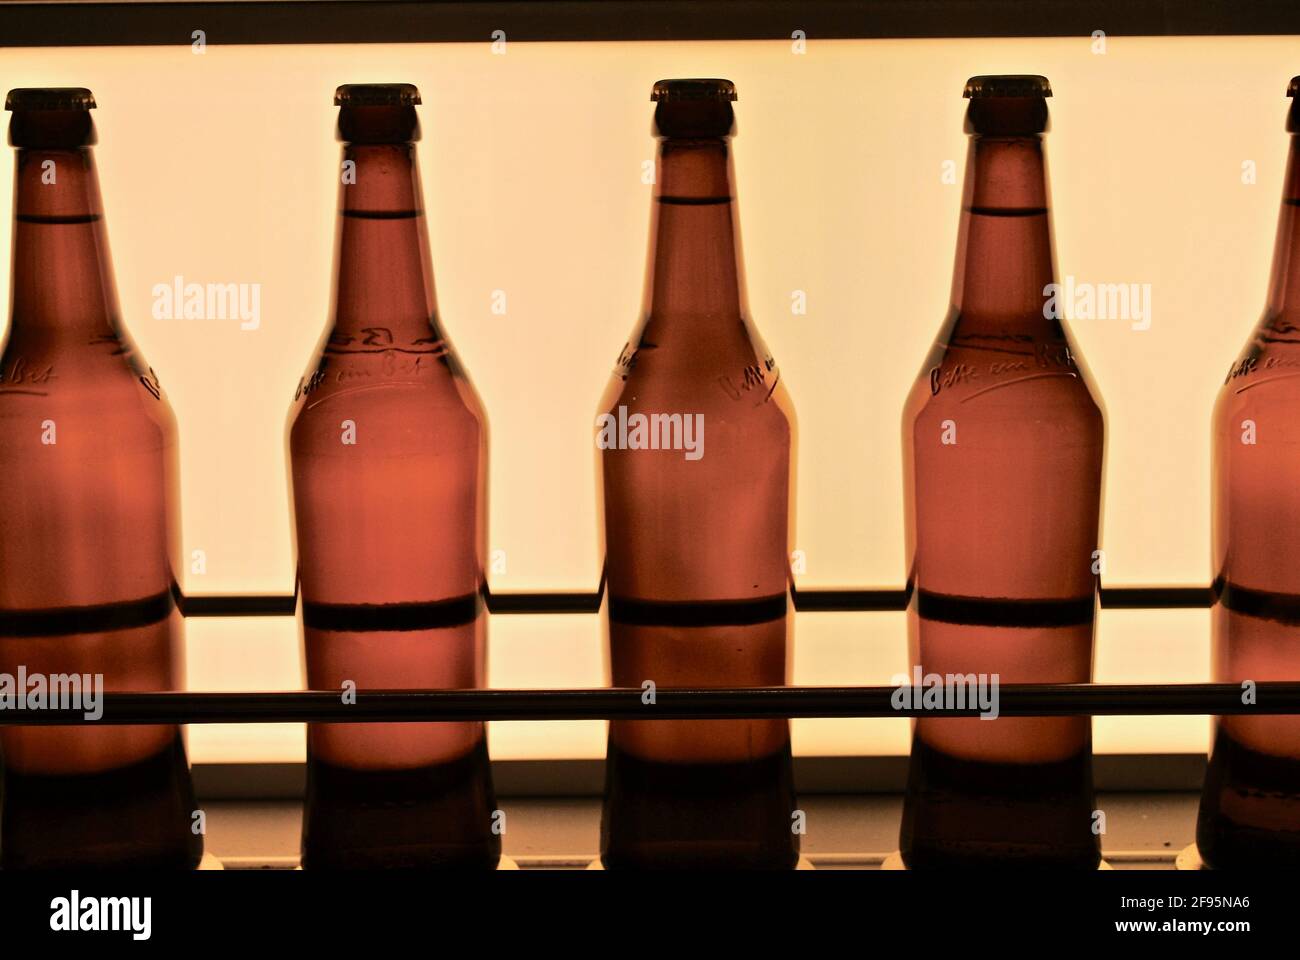 Bitburg, Germany: Bitburger beer bottles on a conveyer belt. Bitburger Brewery (Bitburger Brauerei) is a large German brewery founded in 1817. Stock Photo